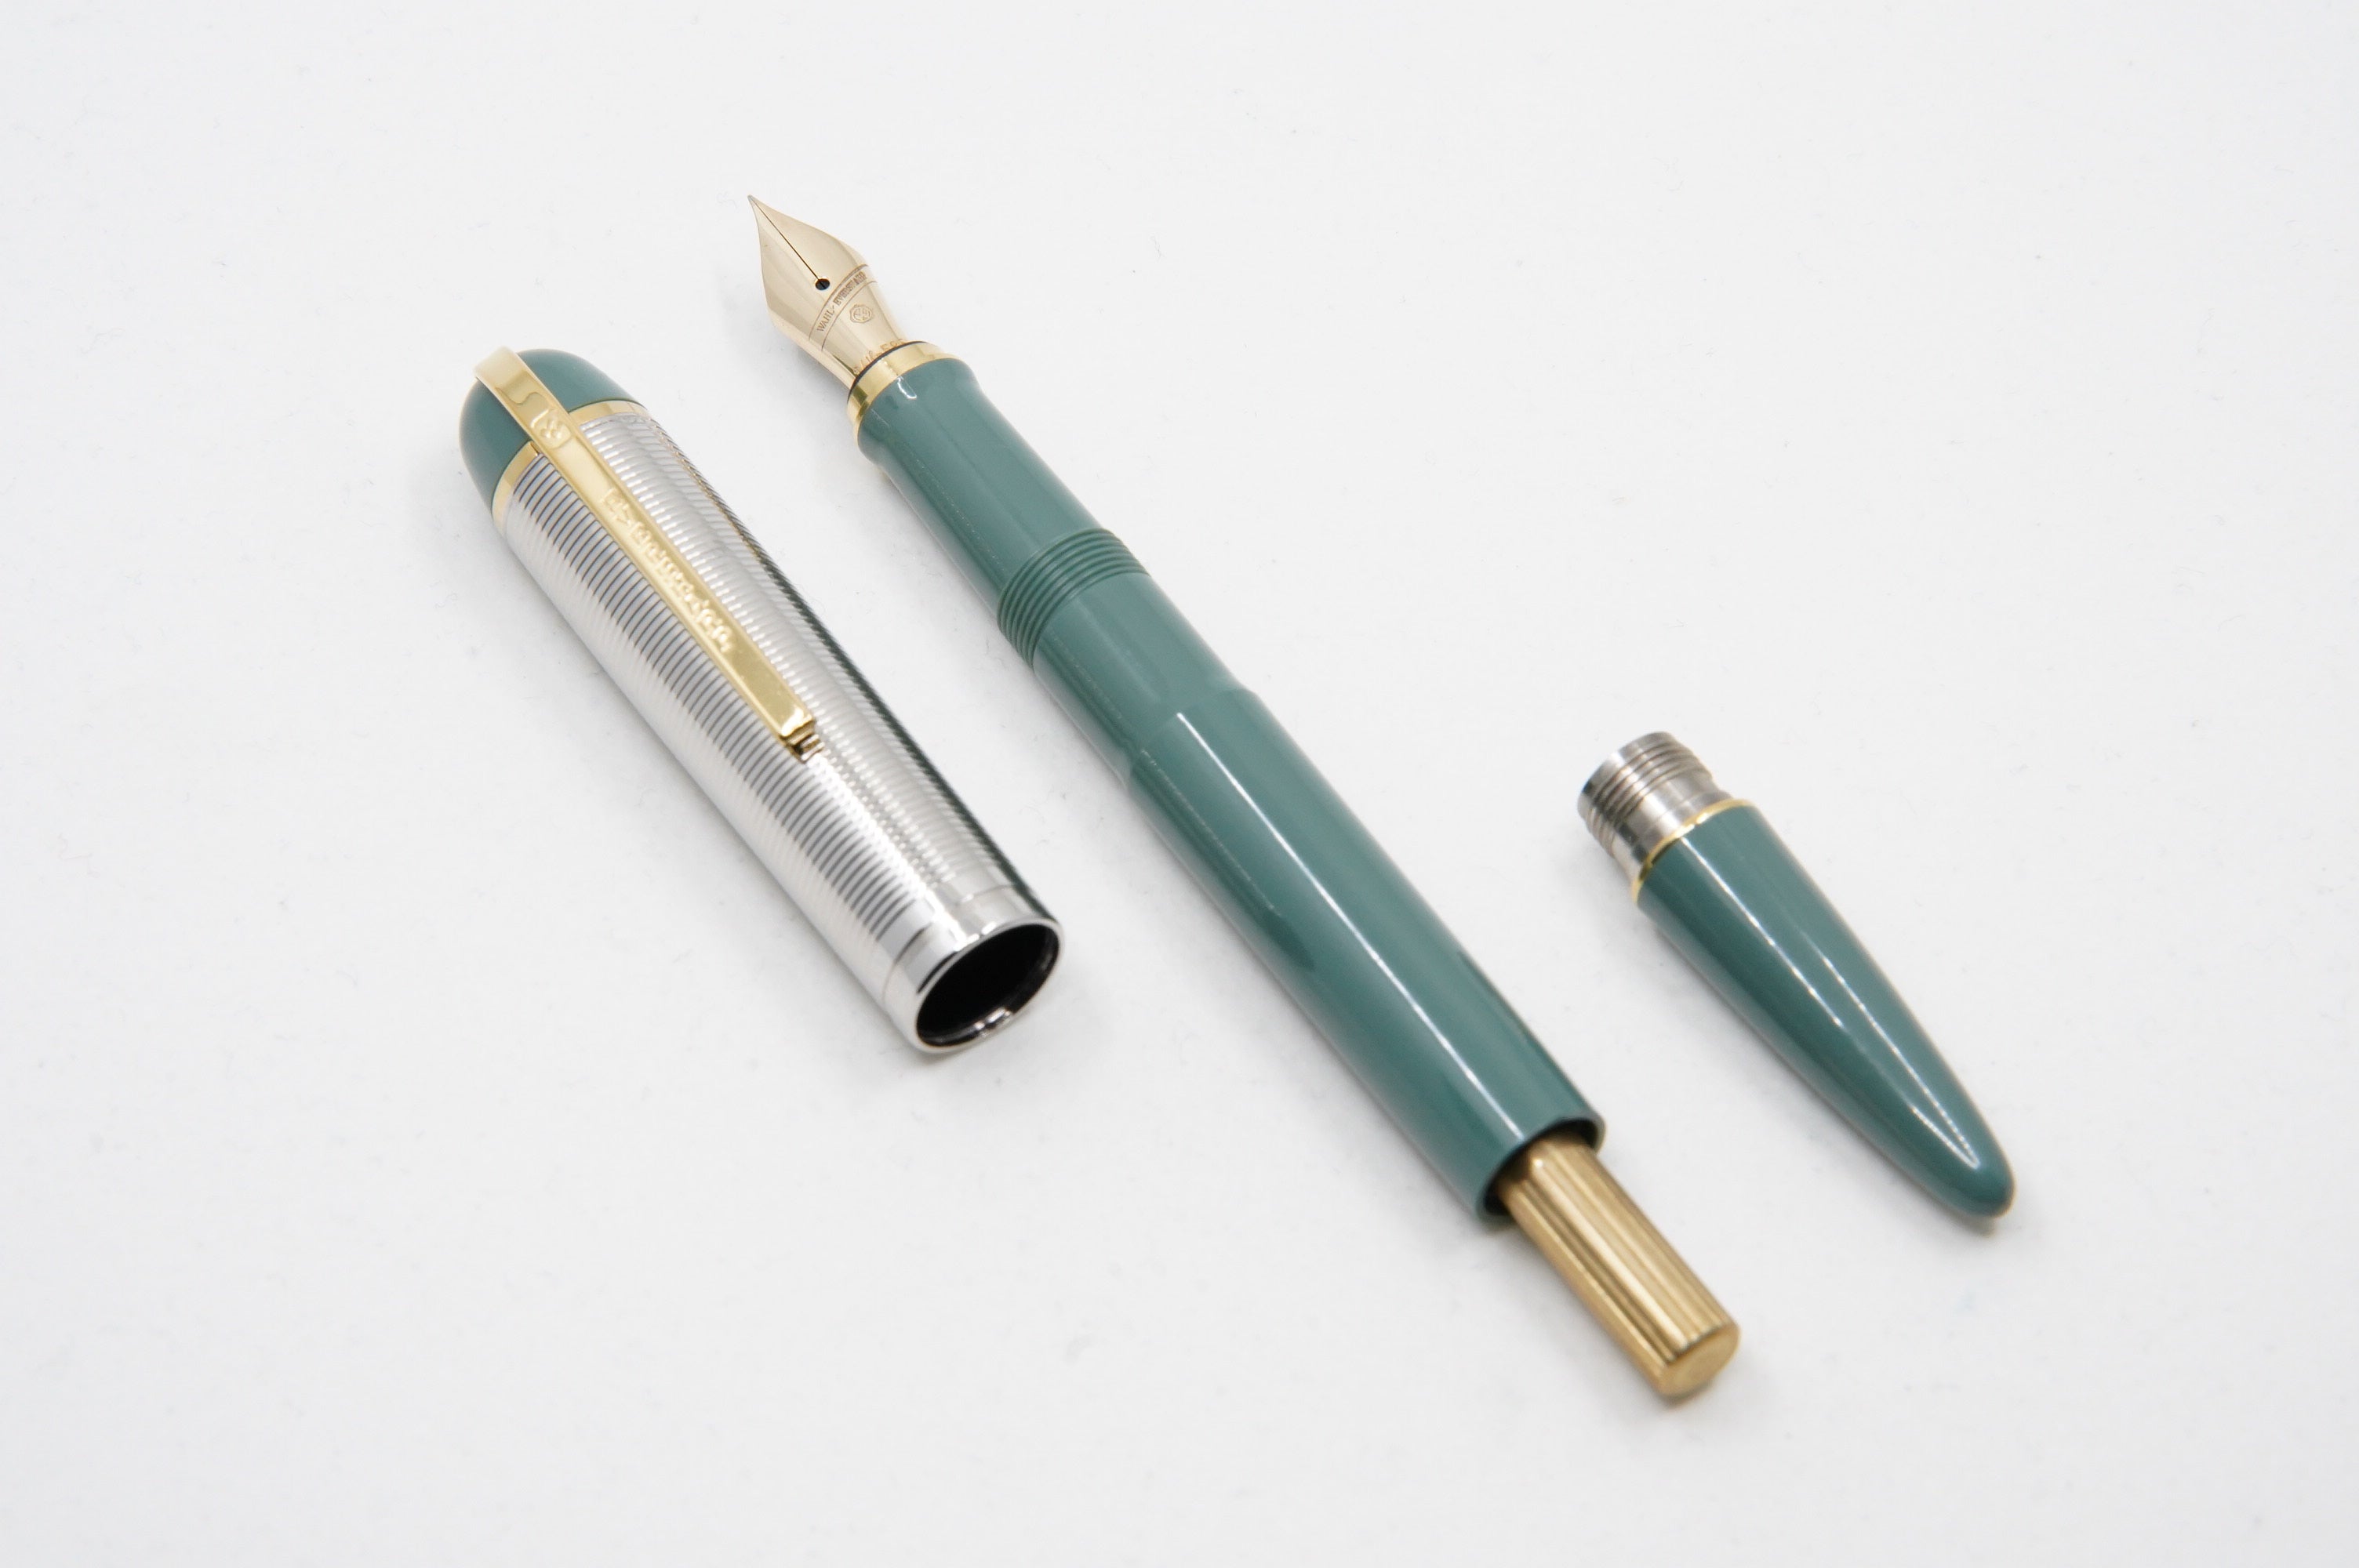 Wahl Eversharp Skyline FP Grey Elephant - The iconic SKYLINE created by Henry Dreyfus in 1939